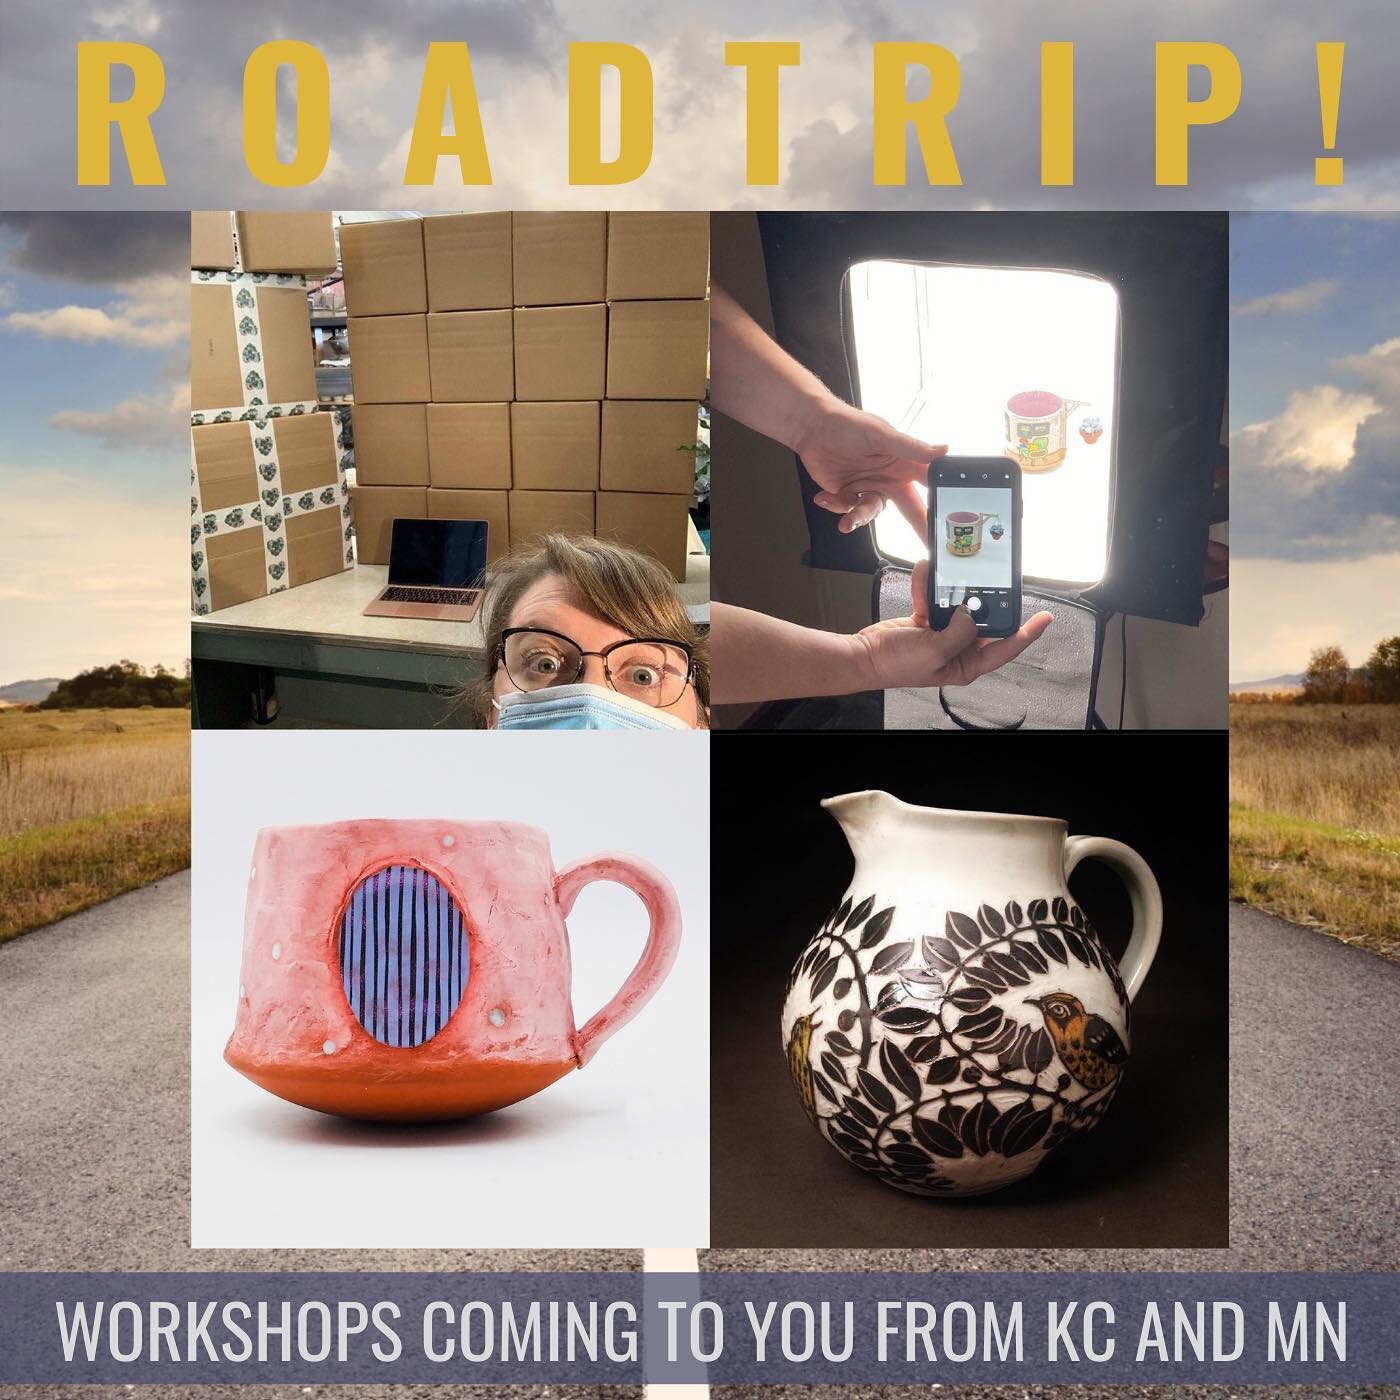 ROADTRIP!!
We're heading to KC and MN to meet up for some workshops in the coming weeks!
&bull;
Fri, May 21
Kate Schroeder (@kate.schroeder.ceramics) will be teaching Shipping, Handling and Branding
&bull;
Sat, May 22
Kate Schroeder presents Smart Ph